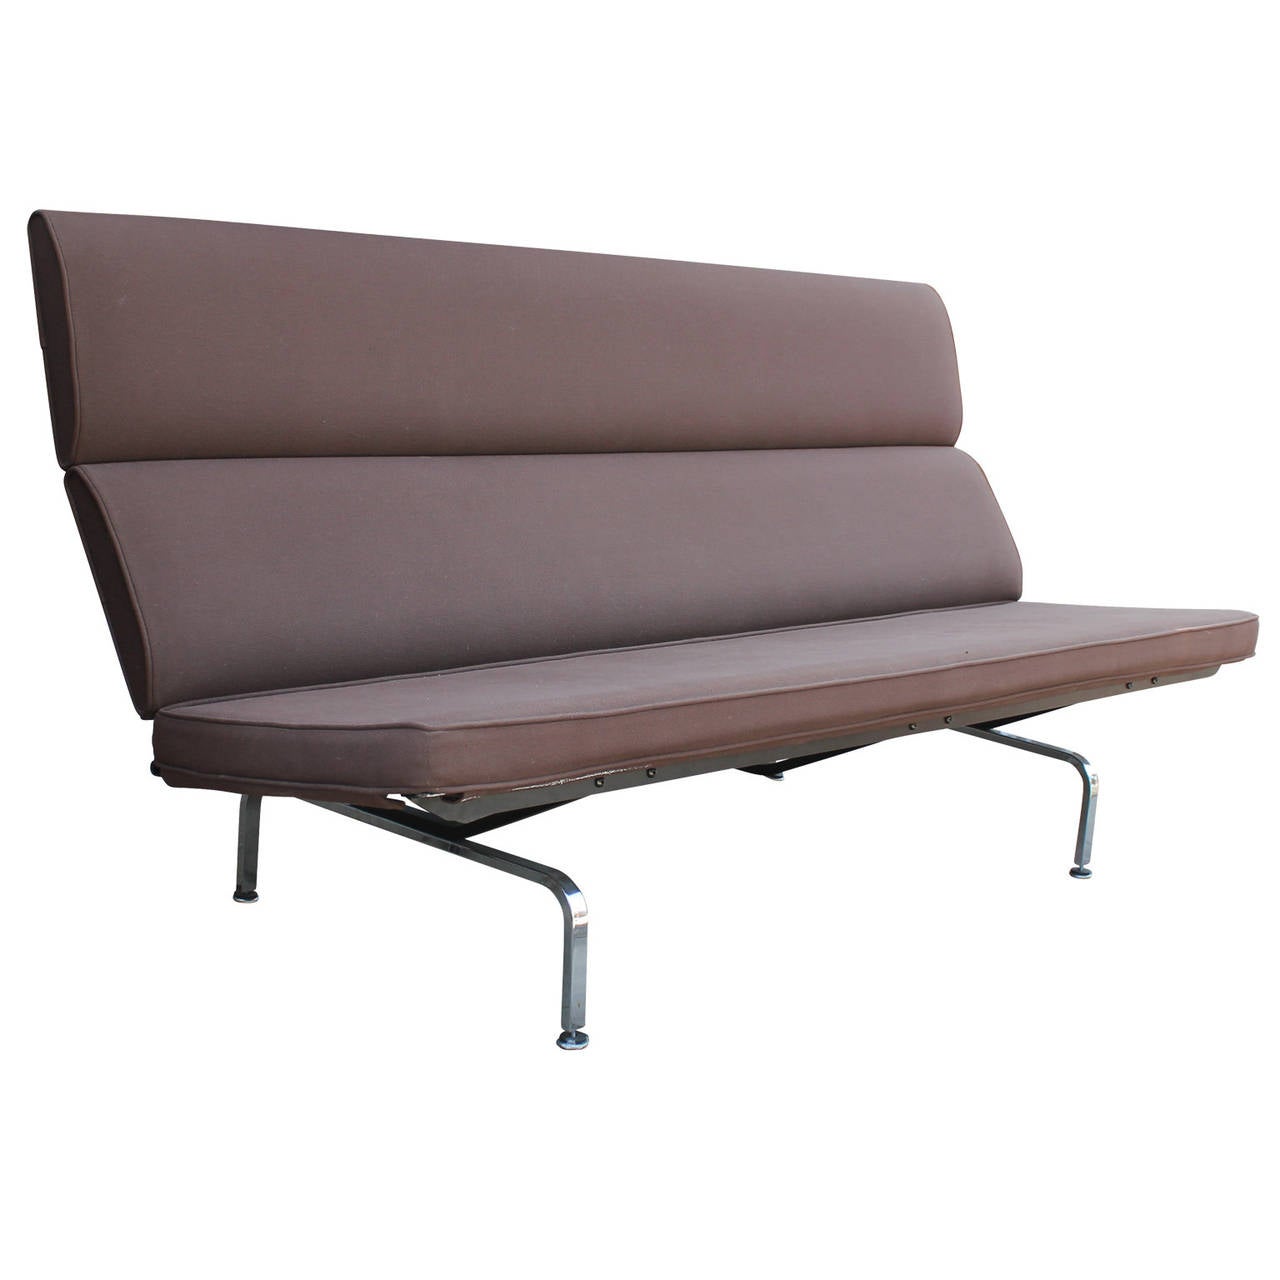 Charles and Ray Eames for Herman Miller 'Compact' sofa with original brown upholstery. Fabric is in good shape, but reupholstery is recommended. Sofa has the iconic three-tiered back and chrome legs.